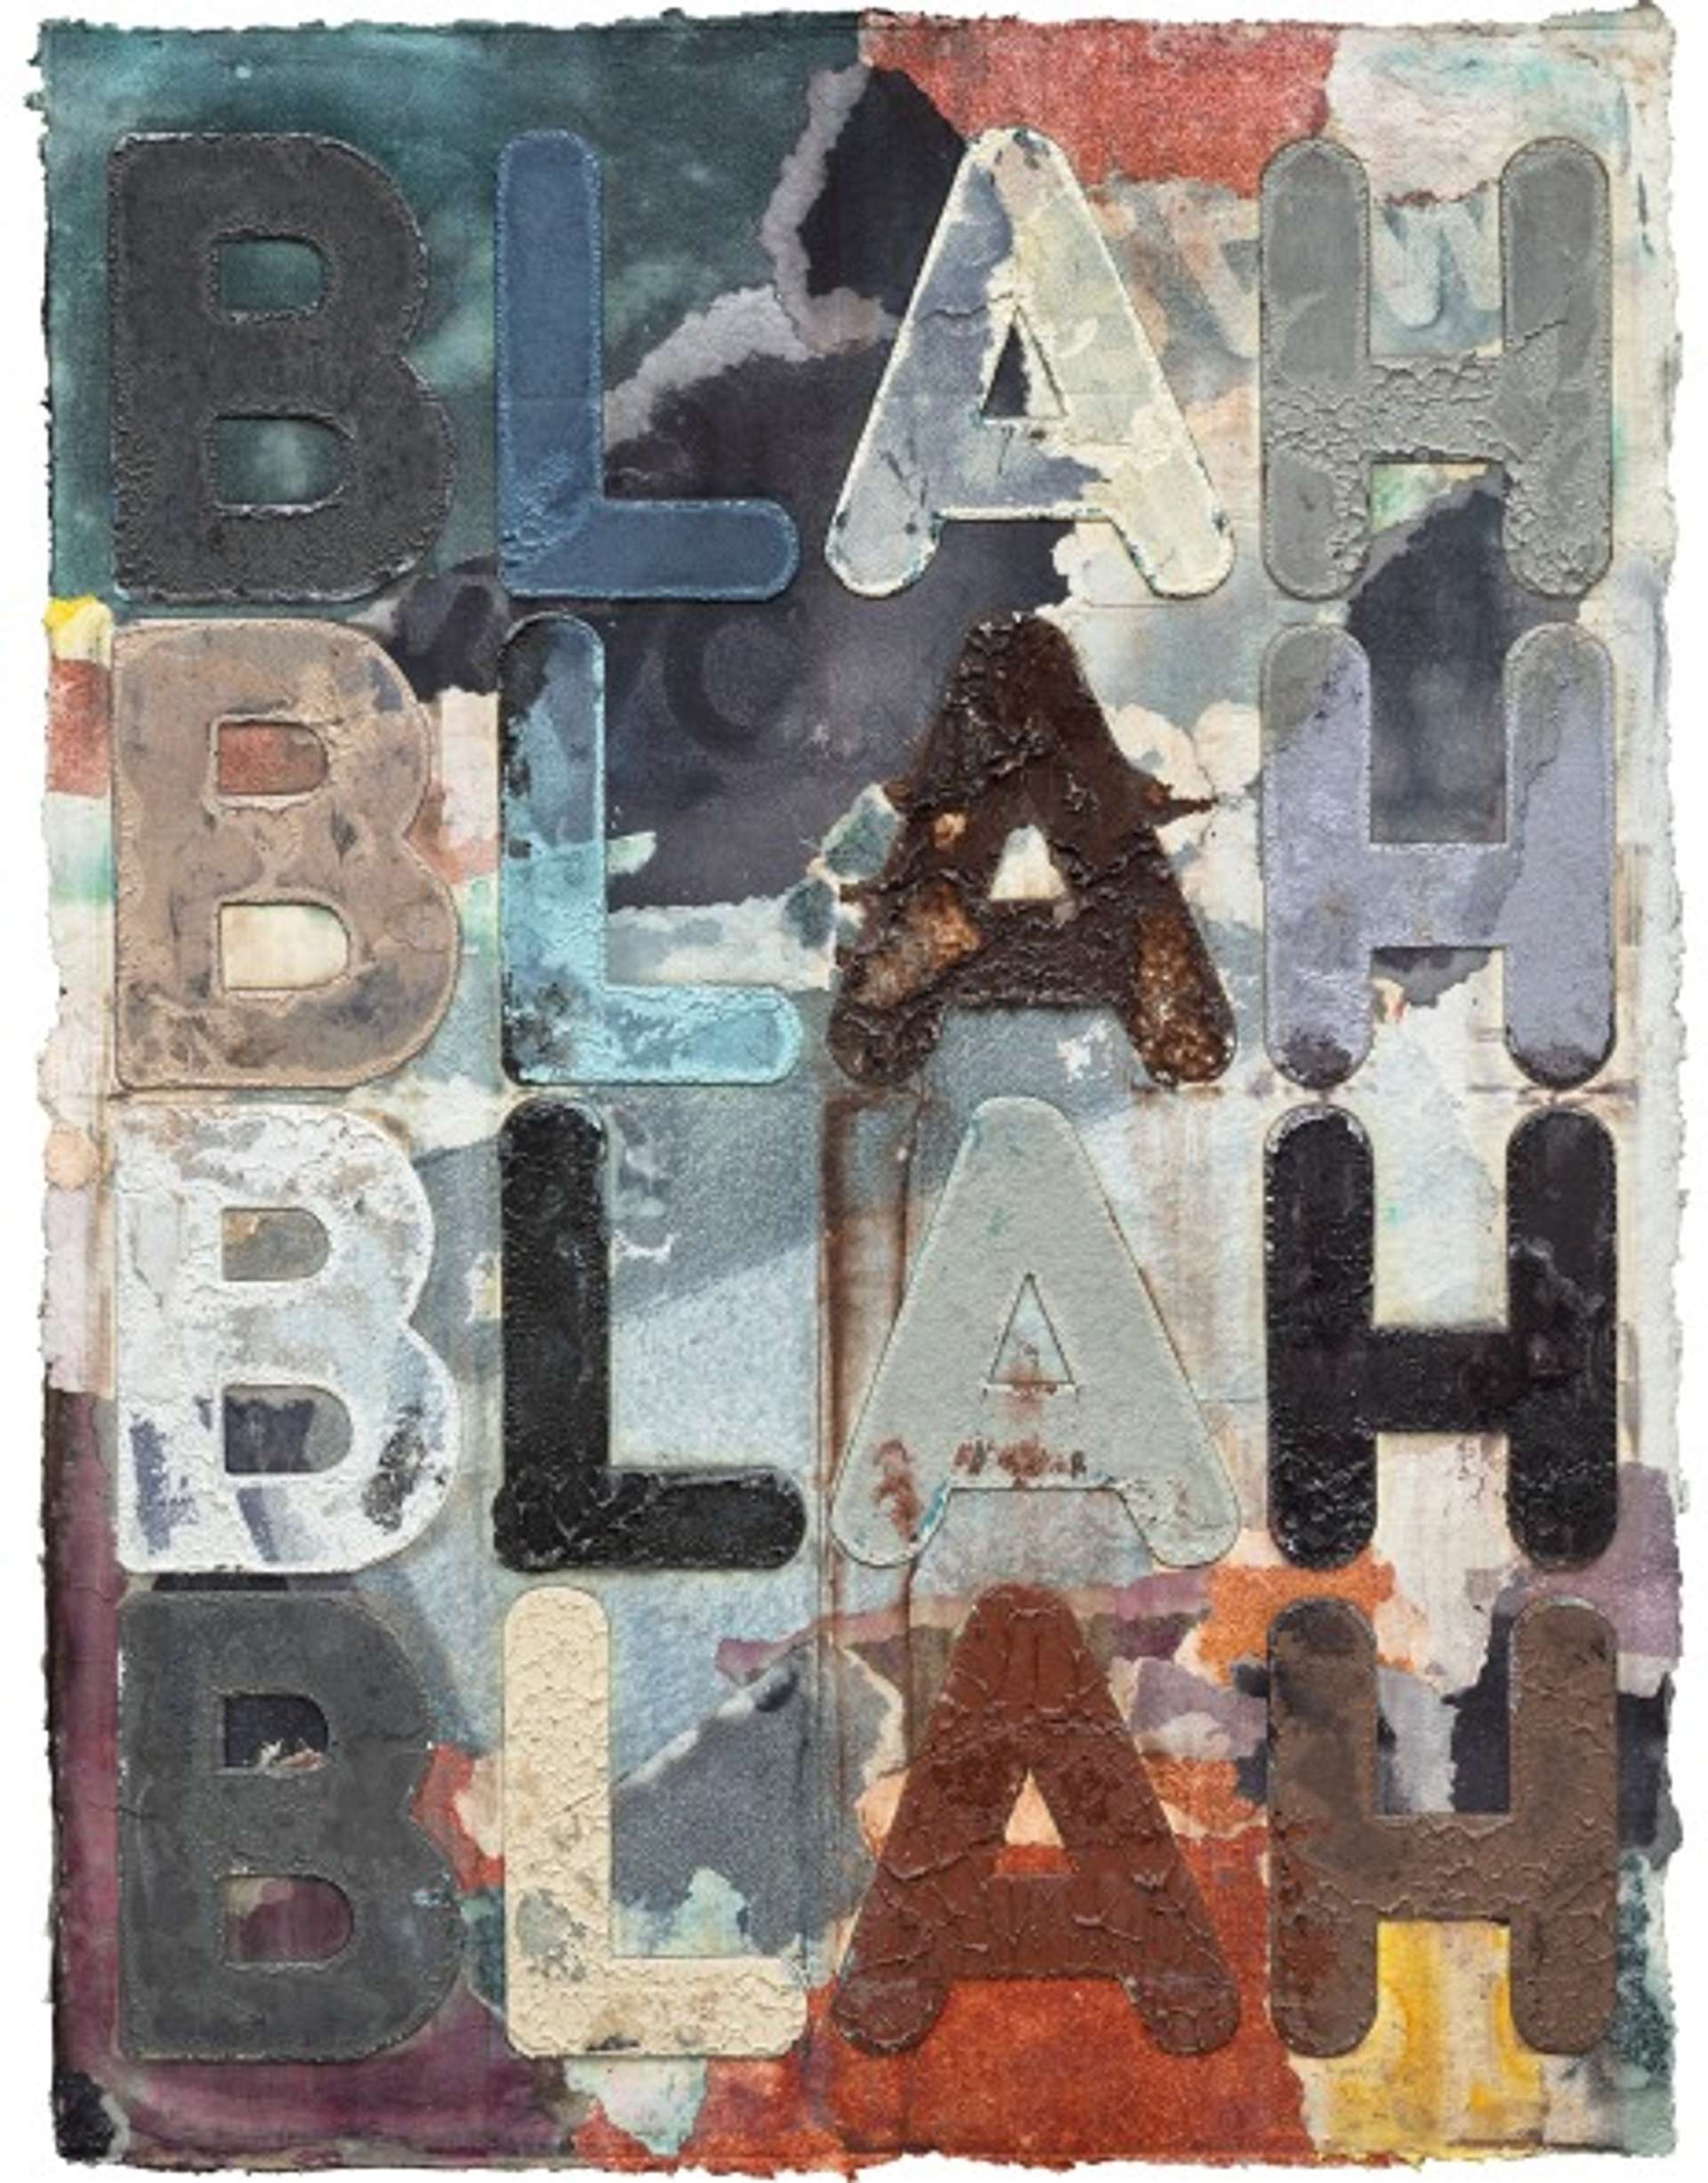 An abstract artwork with a muted color palette of blues, greys, terracotta, yellow, and white. Stenciled words in a blend of colors, including "BLAH BLAH BLAH BLAH," appear over the abstract background.